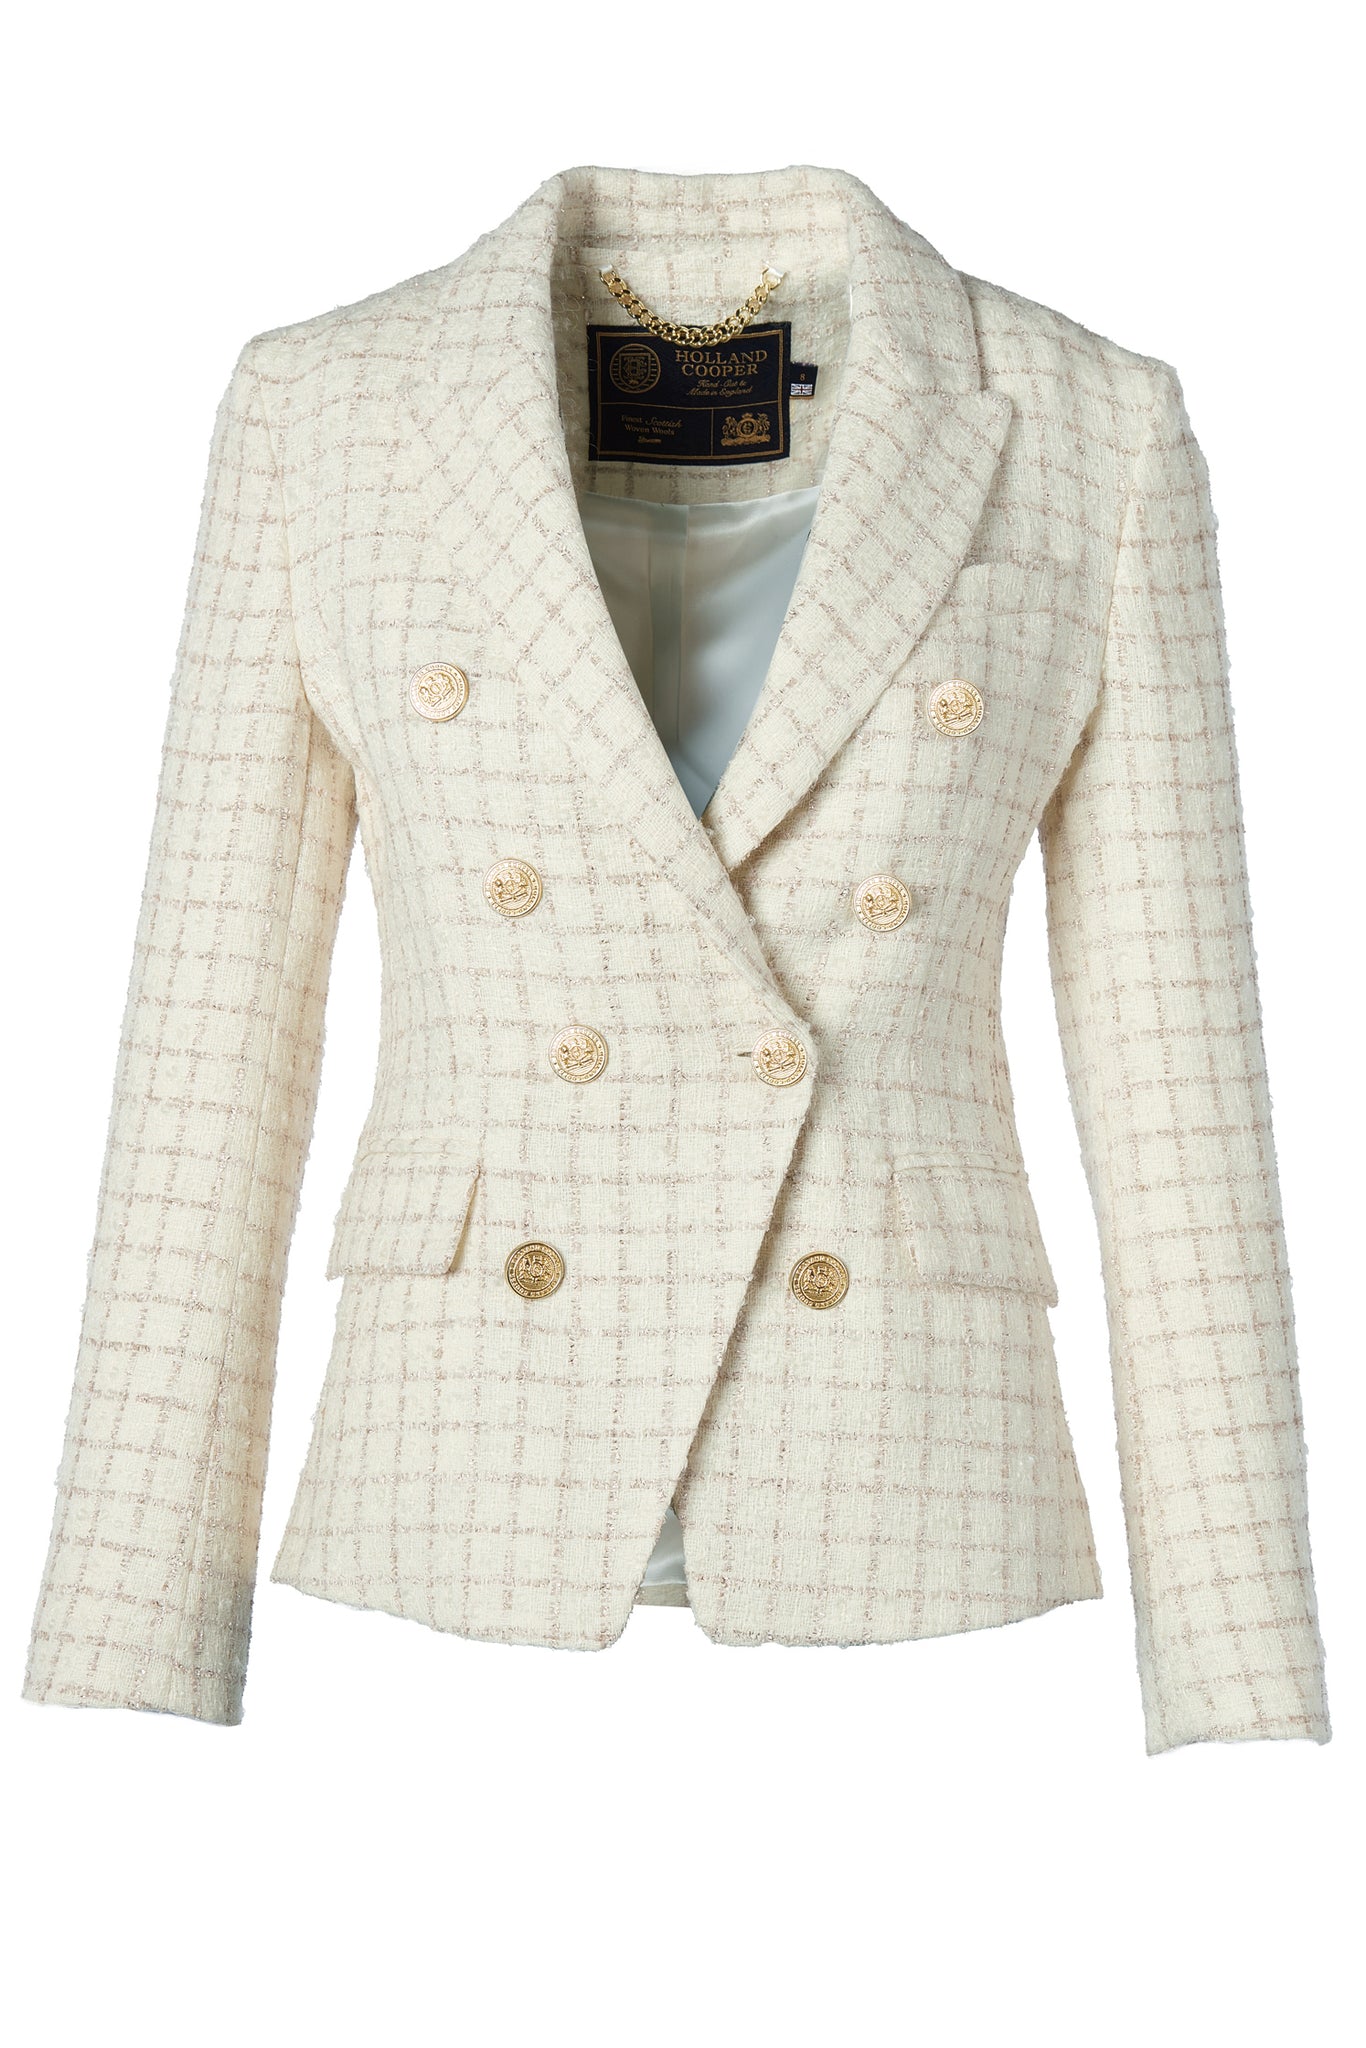 The Ivory Sparkle Tweed Suit